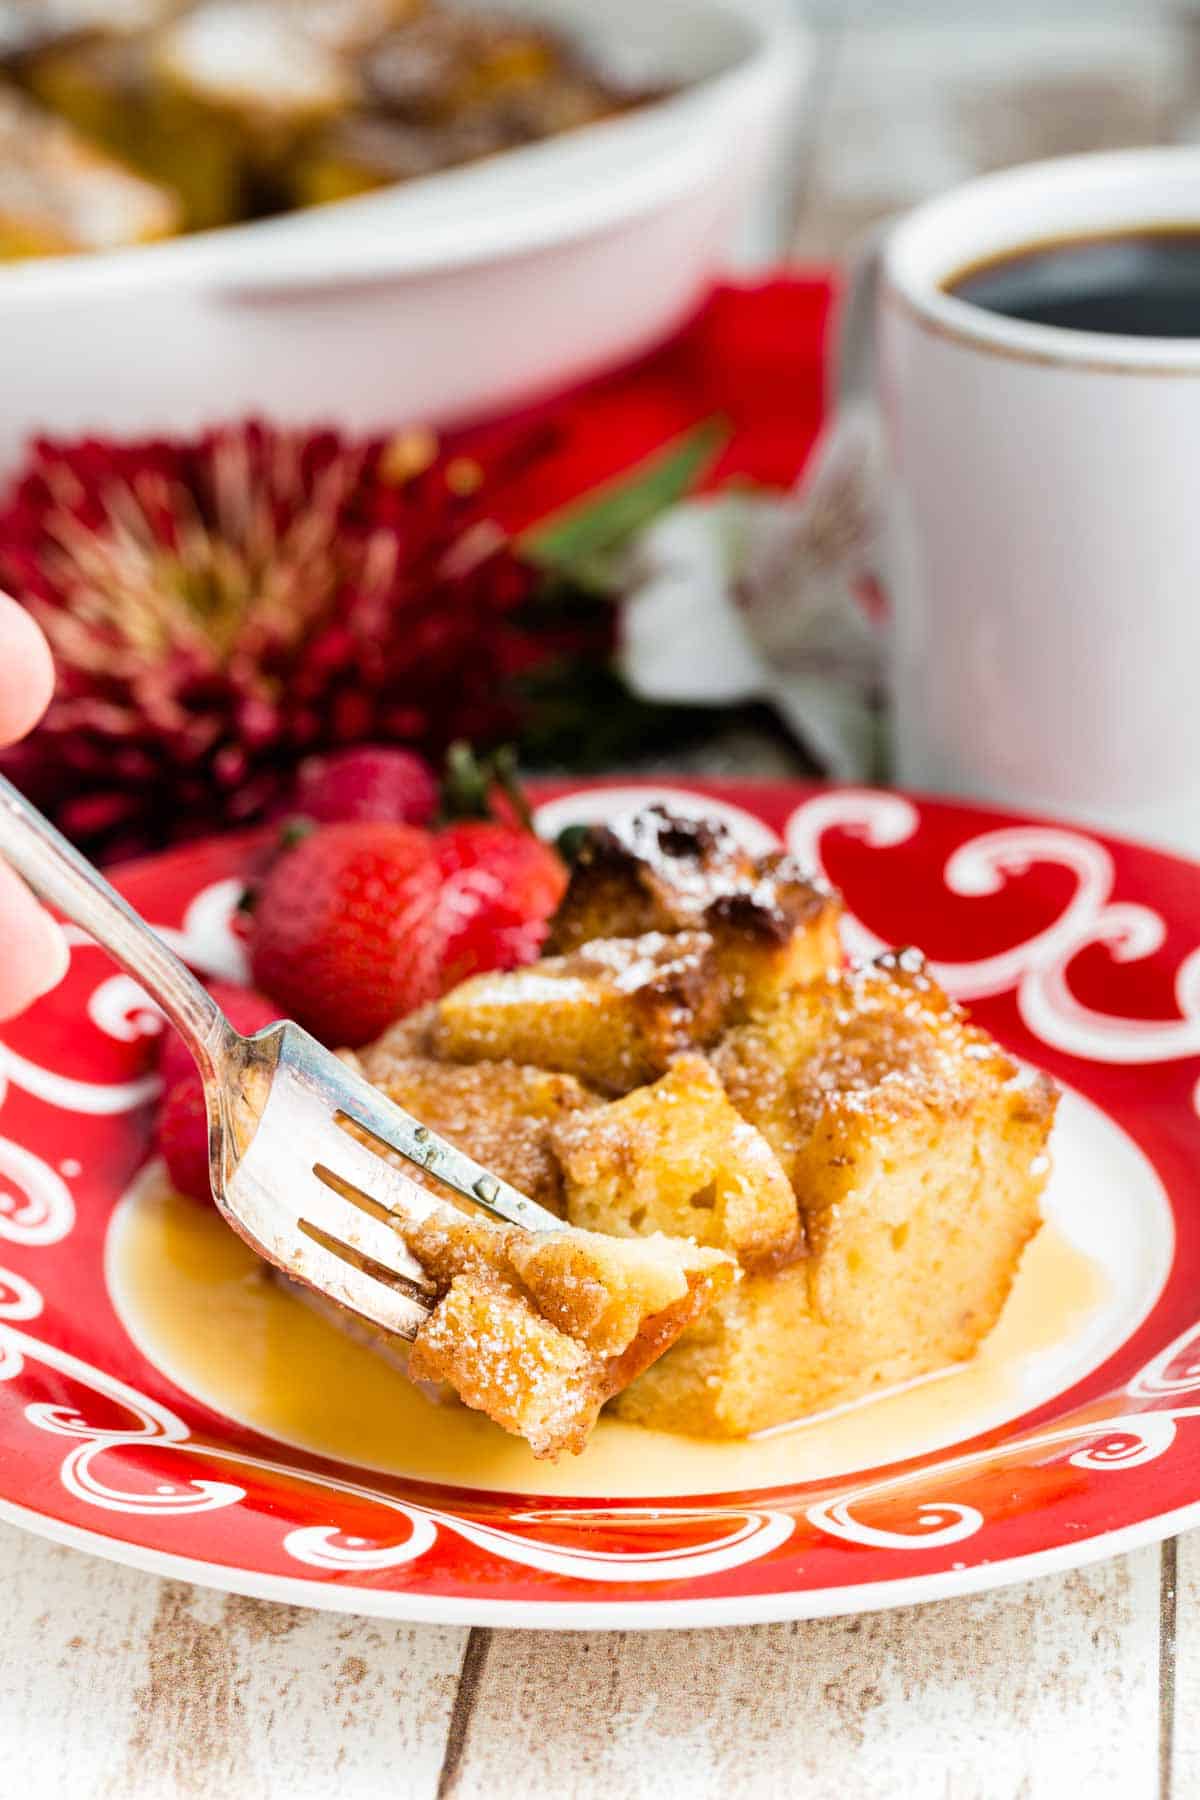 A fork digs into a piece of French toast casserole on a red and white plate. Strawberries and red flowers are seen in the background.